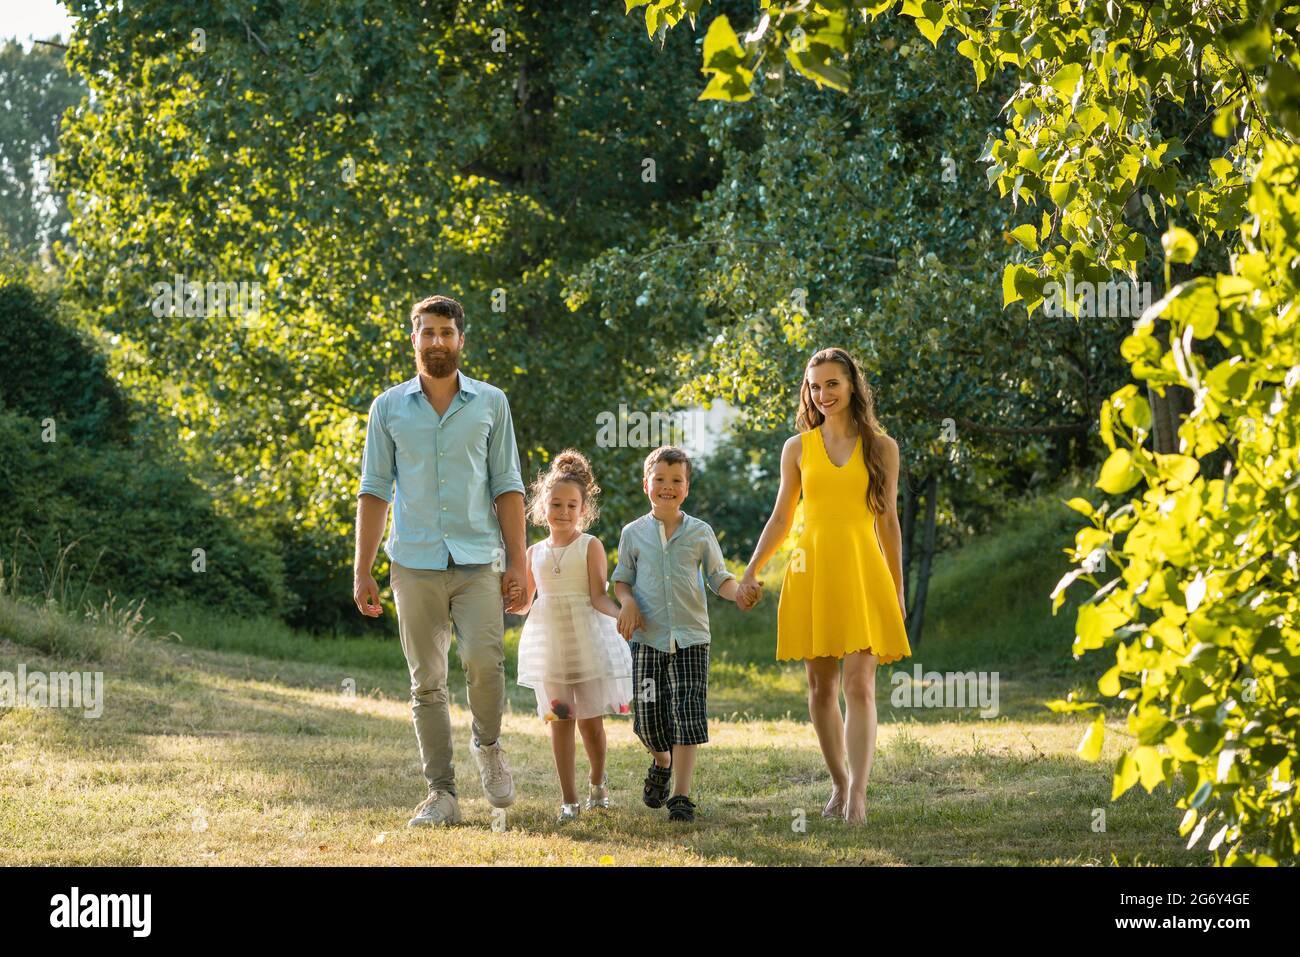 Full length view of a happy family with two children wearing casual summer clothes while holding hands during recreational walk in the park Stock Photo